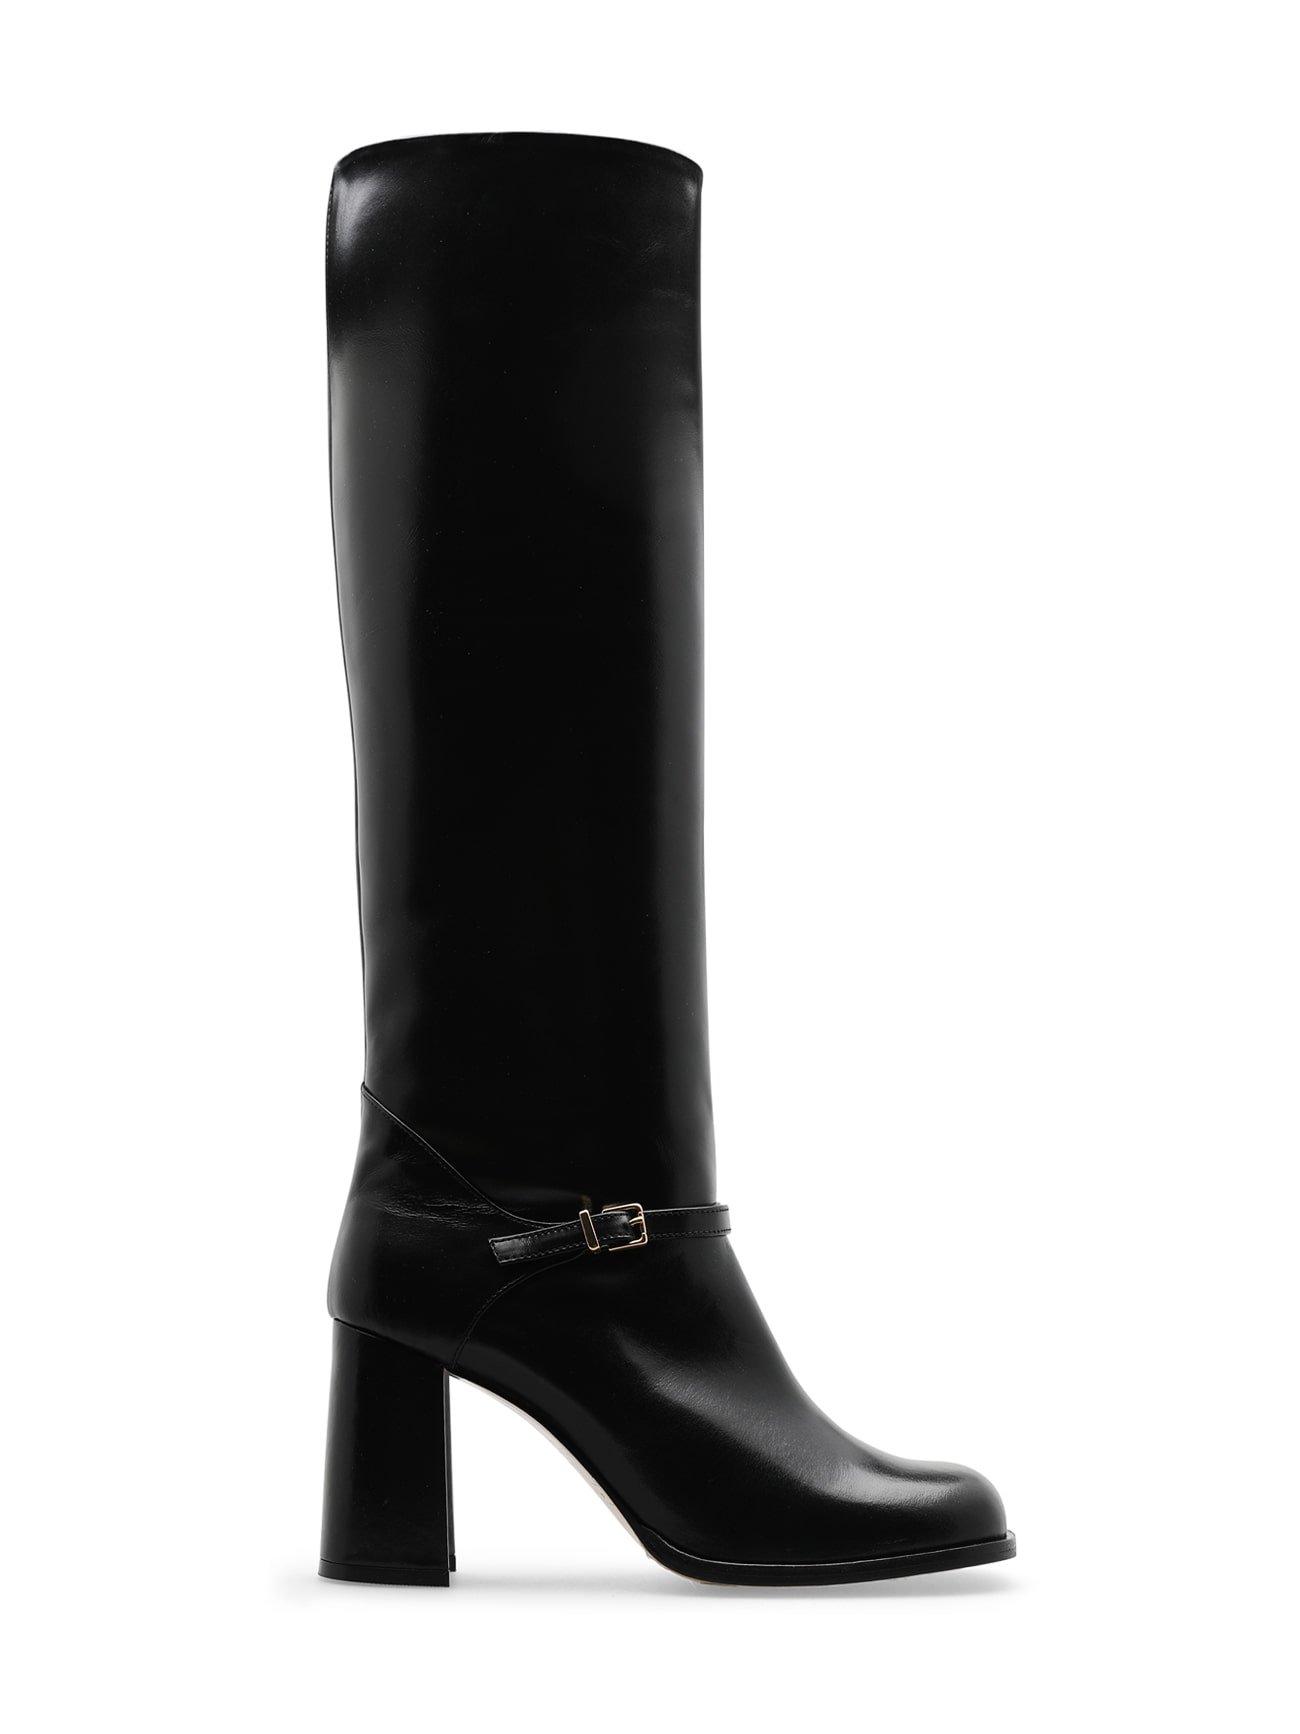 KYLIE DOUBLE SOLE KNEE BOOTS - BLACK